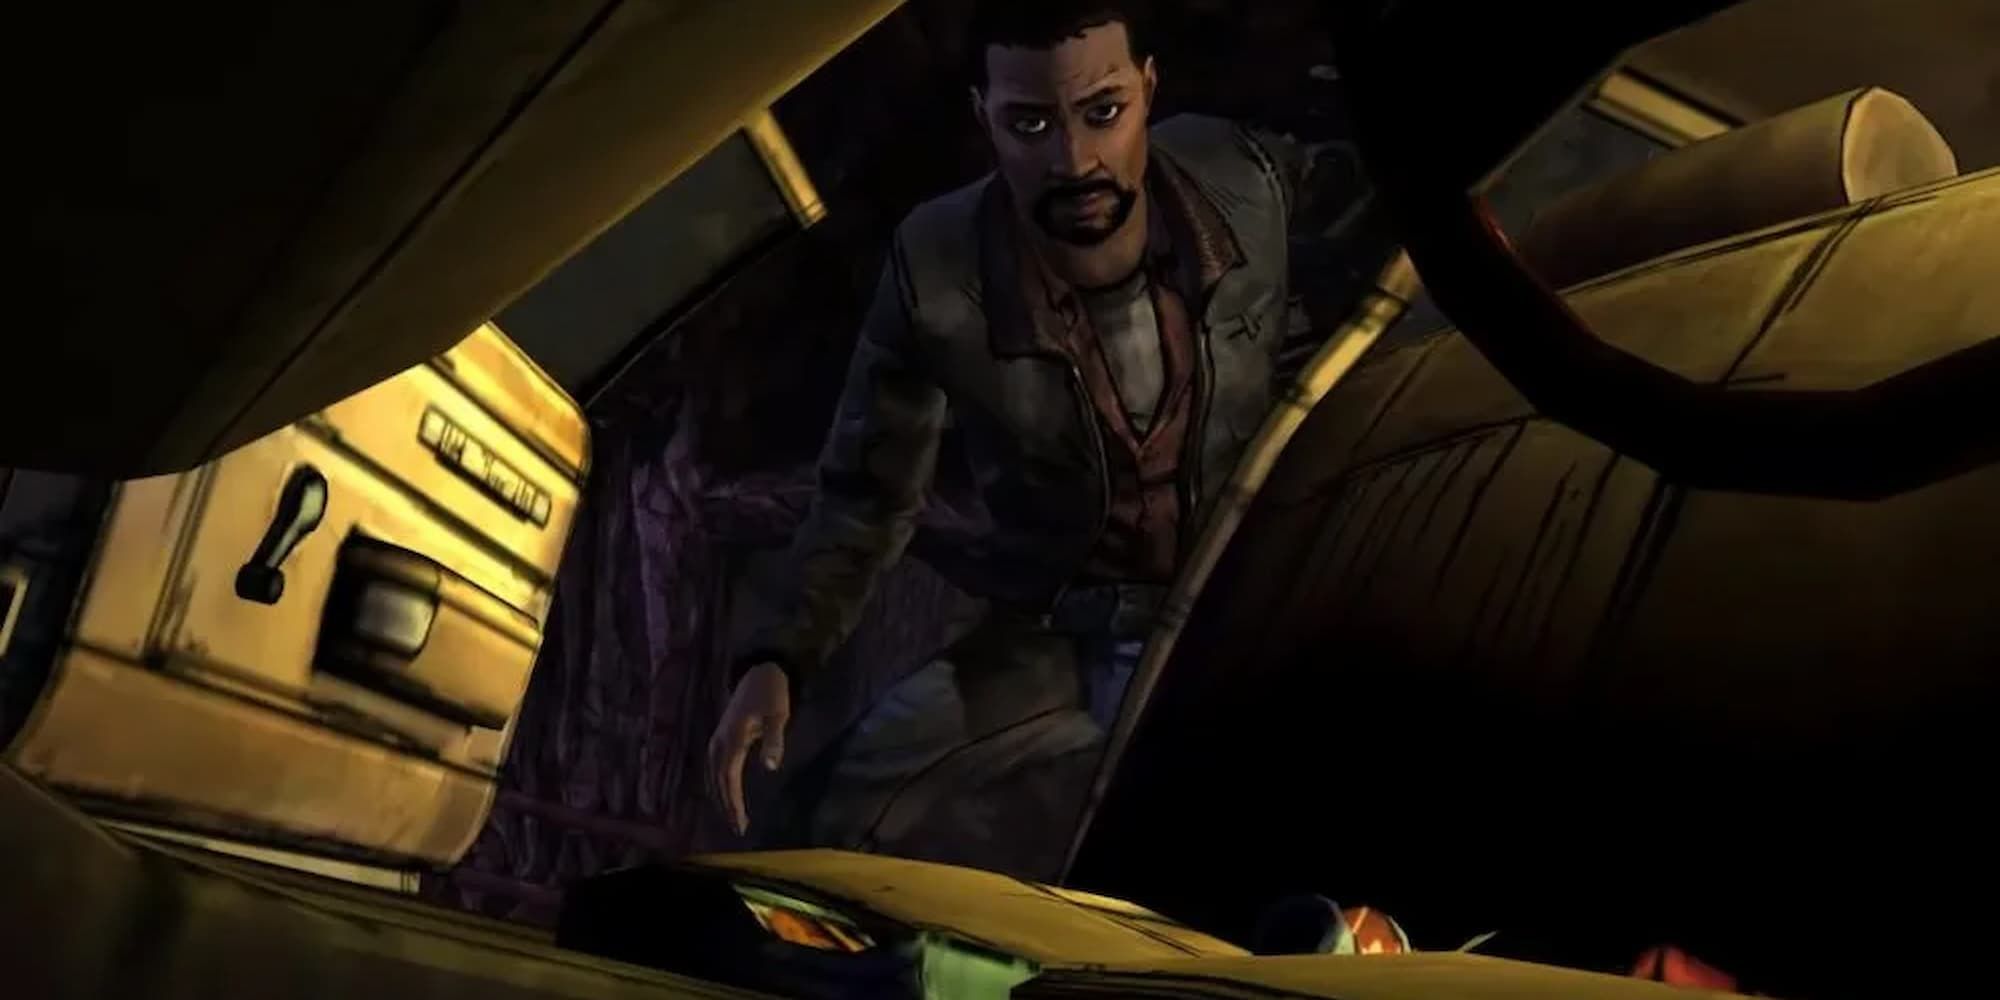 Lee inspects an abandoned car and starts looting it in Telltale's The Walking Dead.